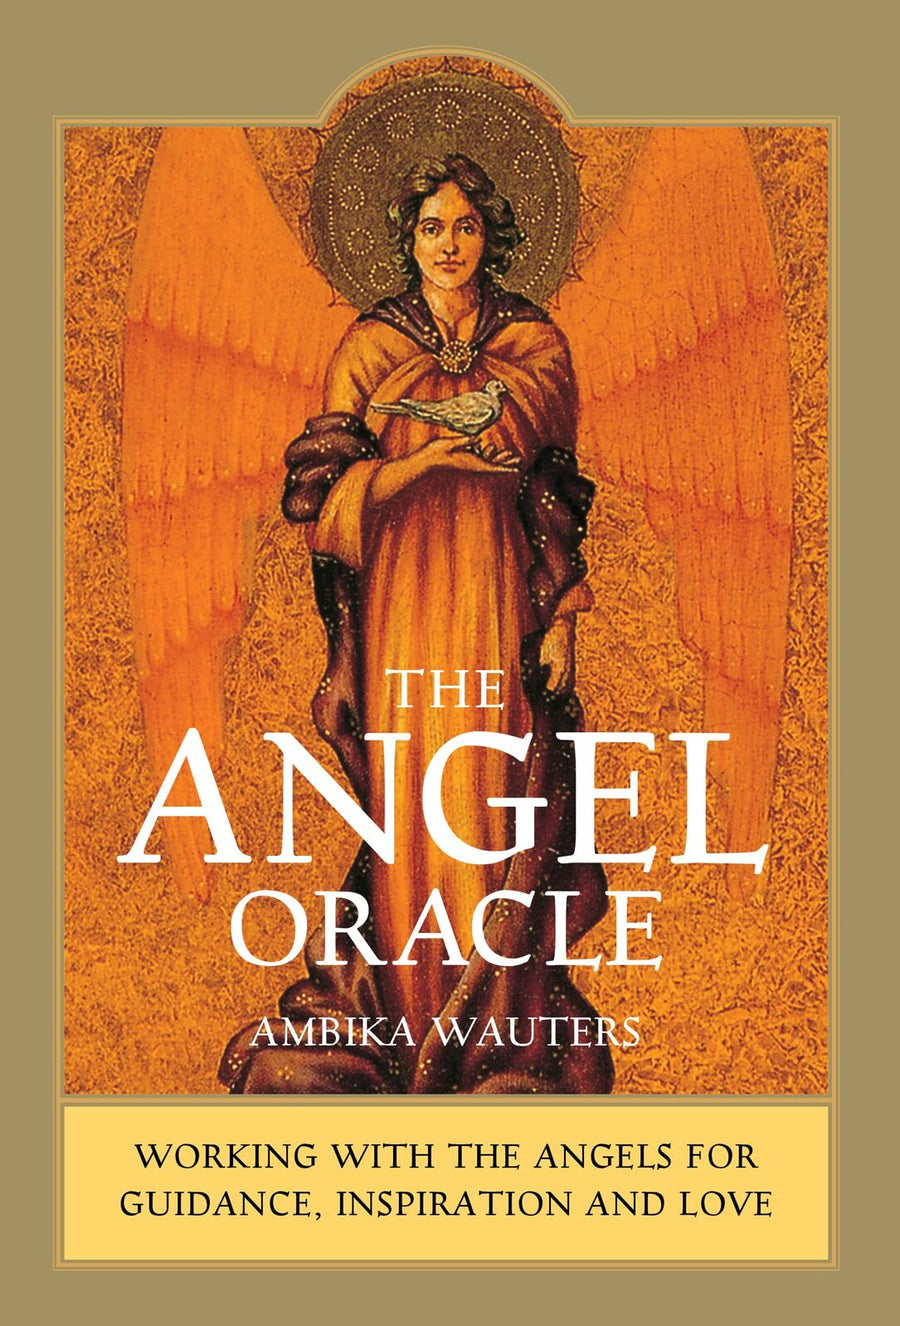 Oracle - The Angel - Ambika Wauters